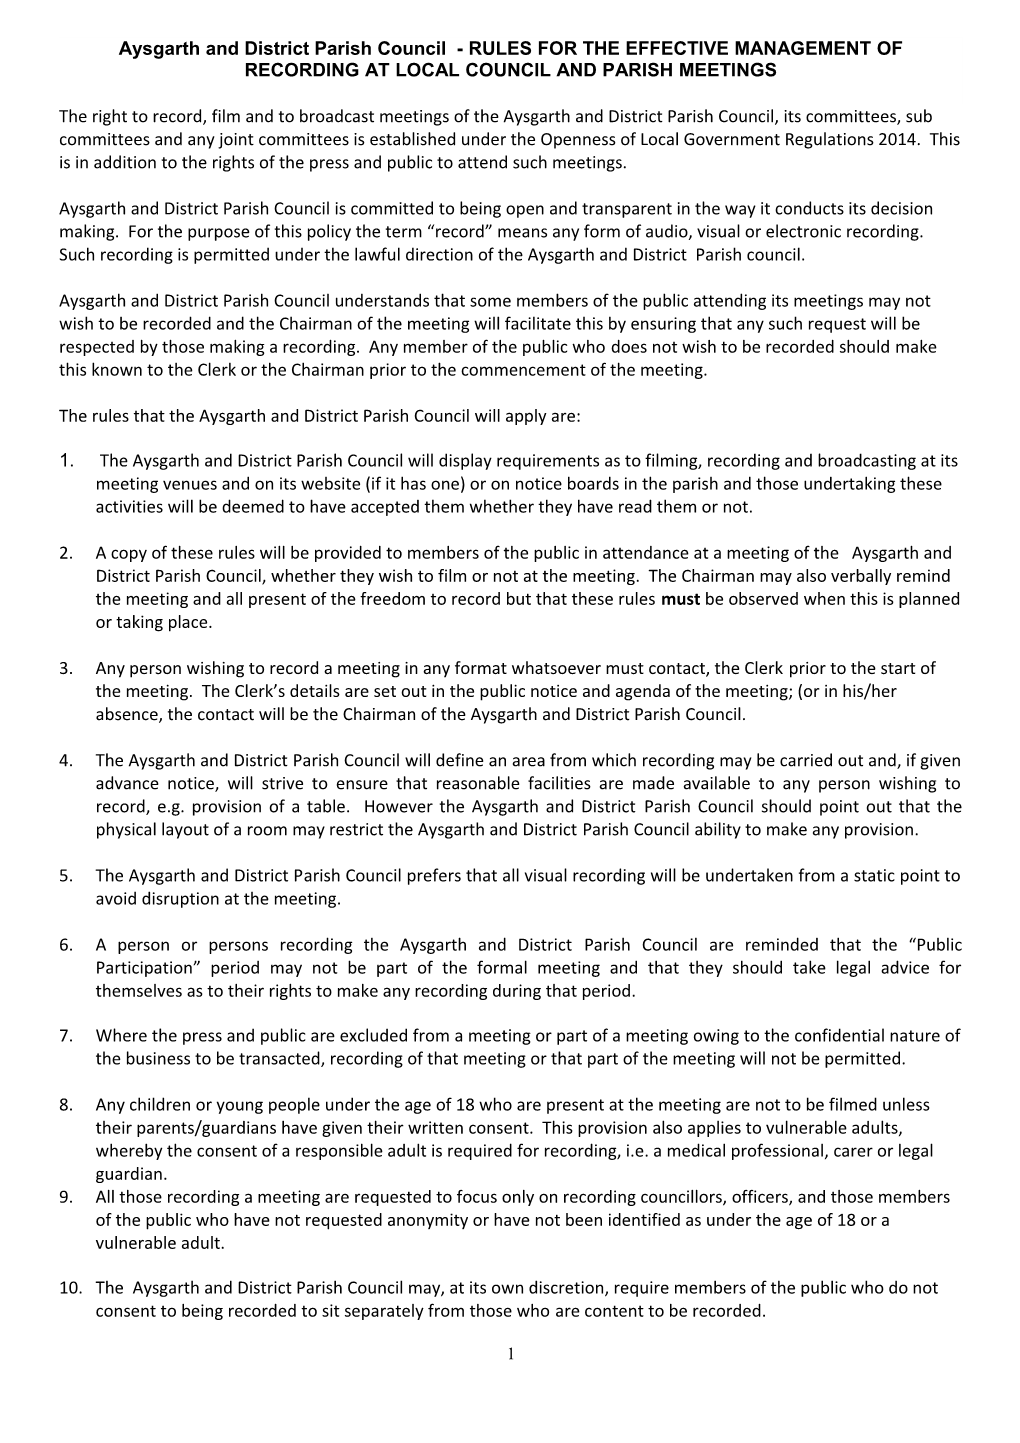 Aysgarth and District Parish Council - RULES for the EFFECTIVE MANAGEMENT of RECORDING